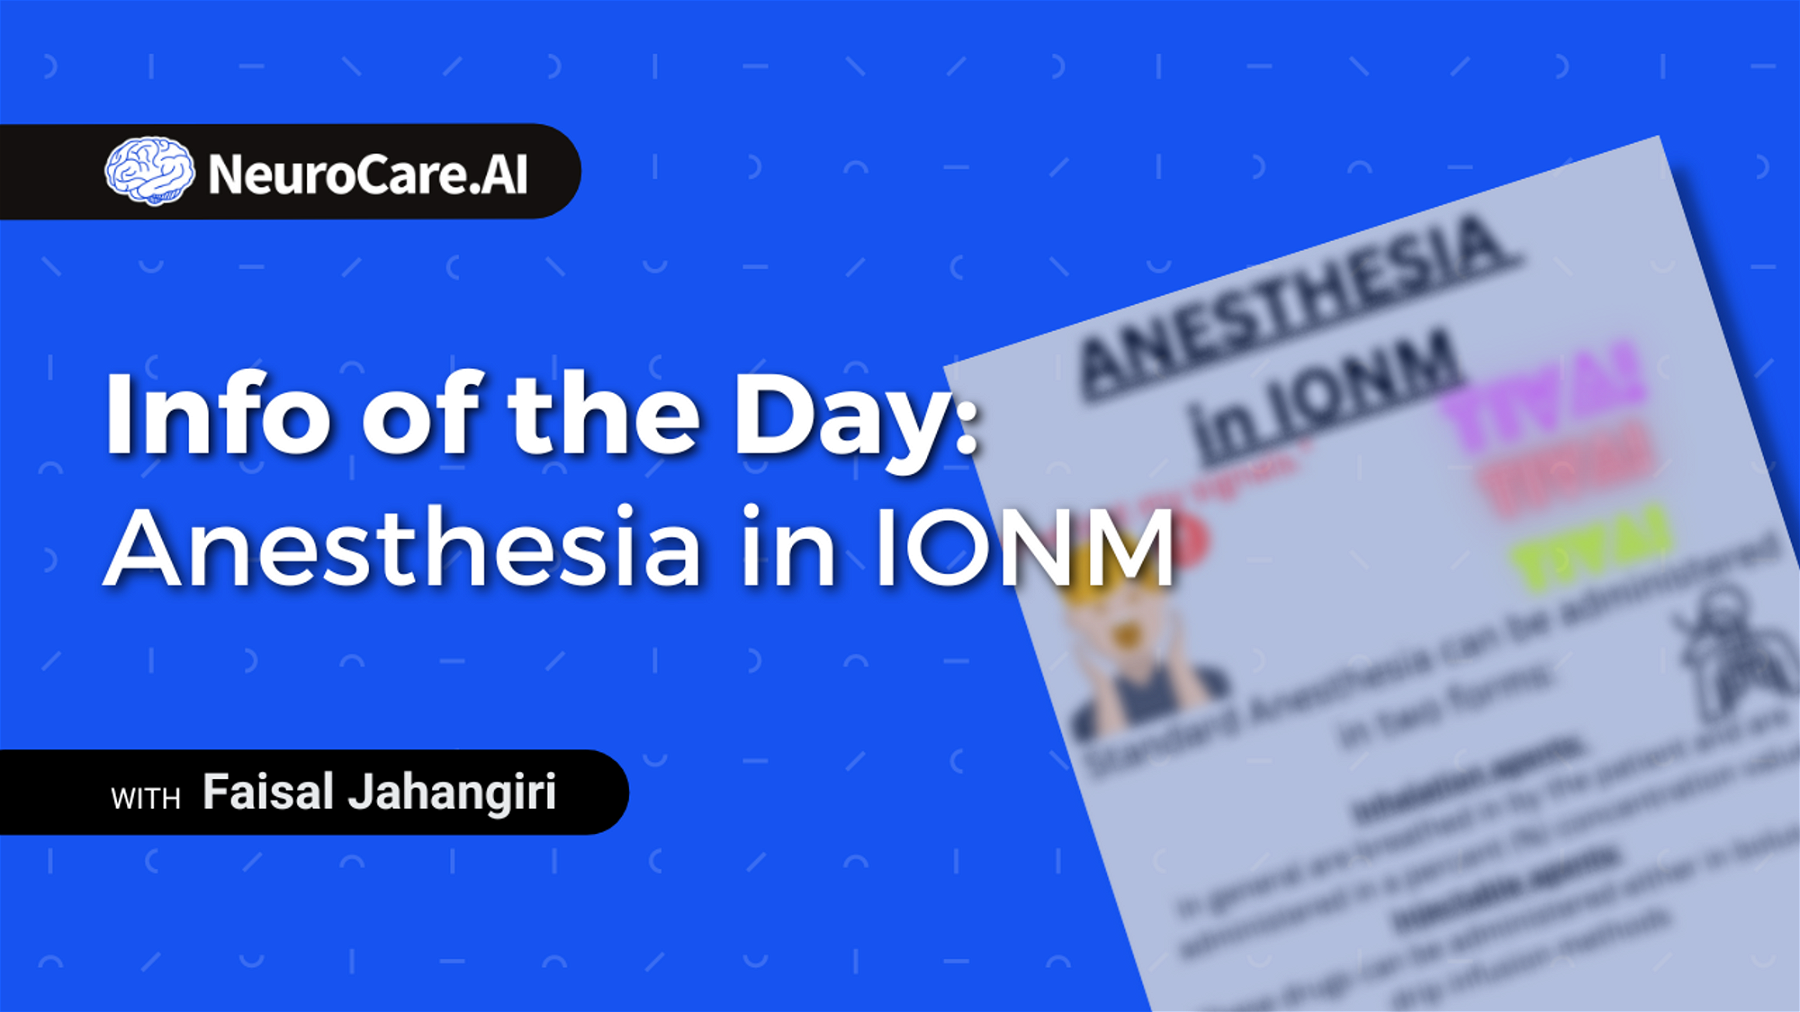 Info of the Day: "Anesthesia in IONM"